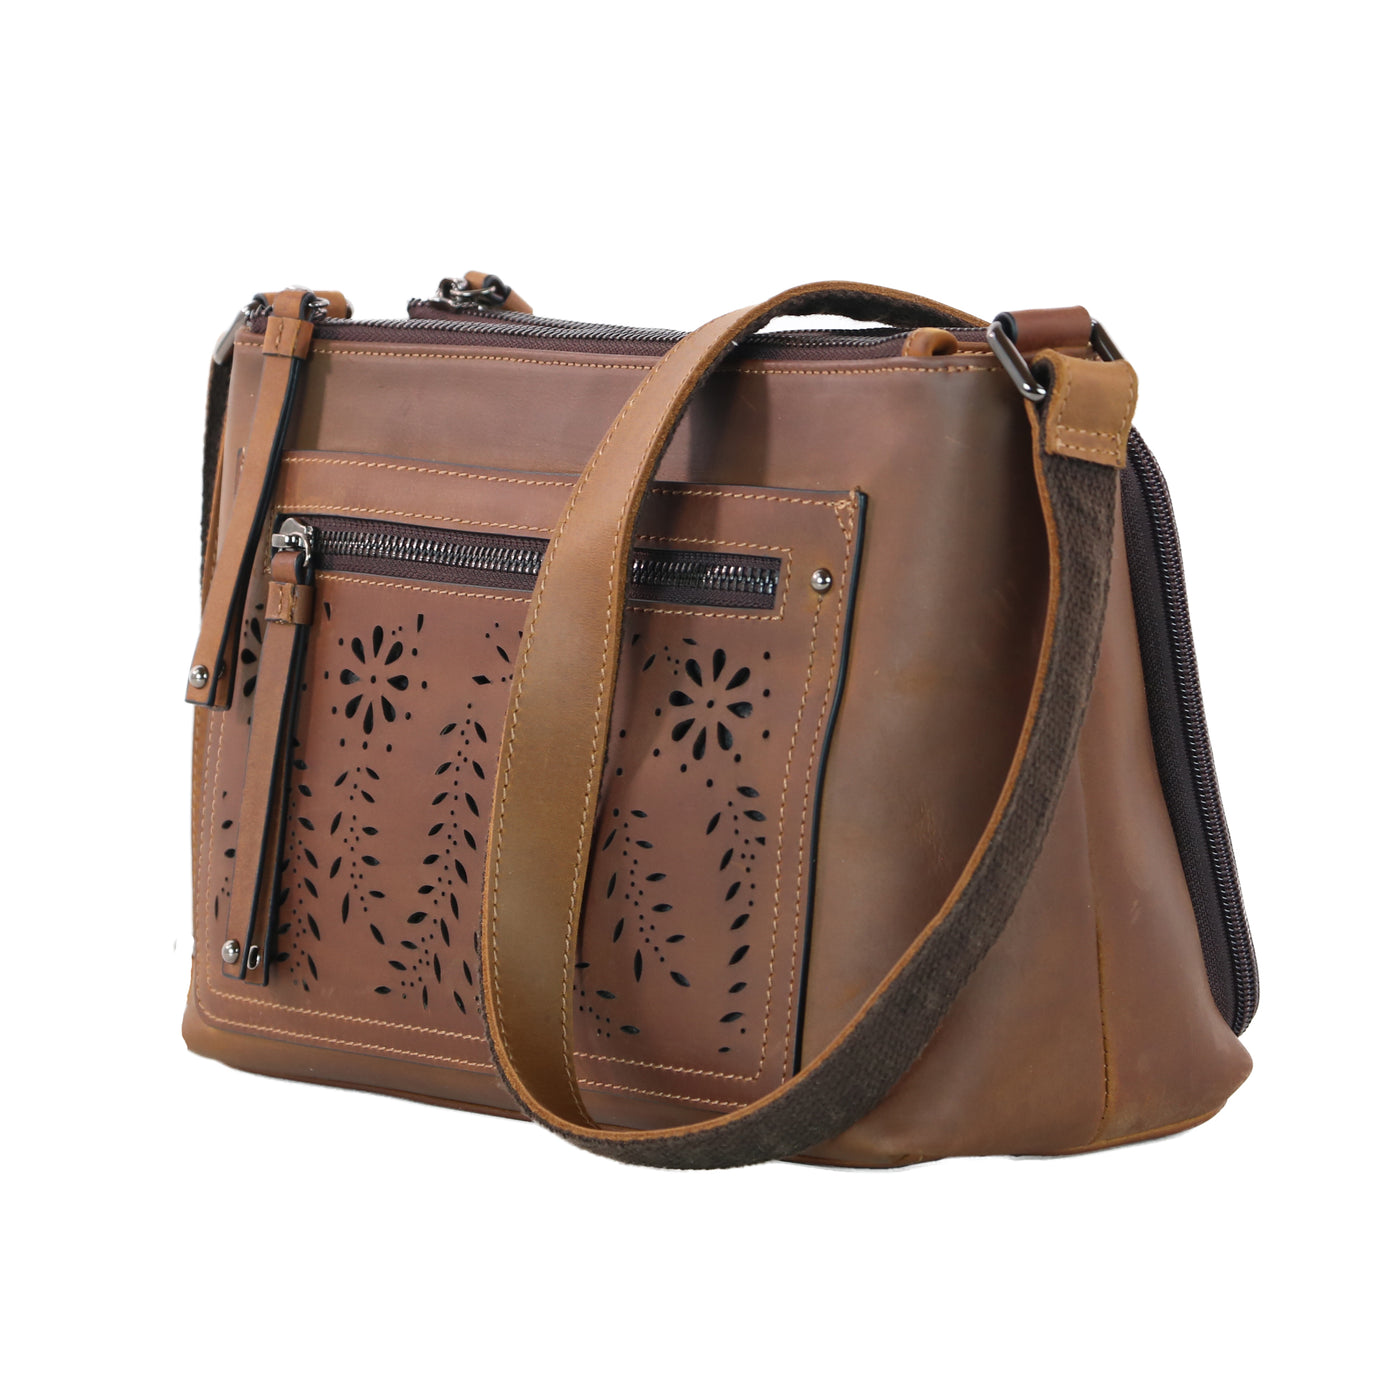 oncealed Carry Brynlee Leather Crossbody - Lady Conceal Gun Crossbody Bag - Unique Hide Crossbody Gun and Pistol Bag - crossbody bag for concealed gun carry - Unique Cowboy Leather Crossbody gun bag - concealed carry purse for woman